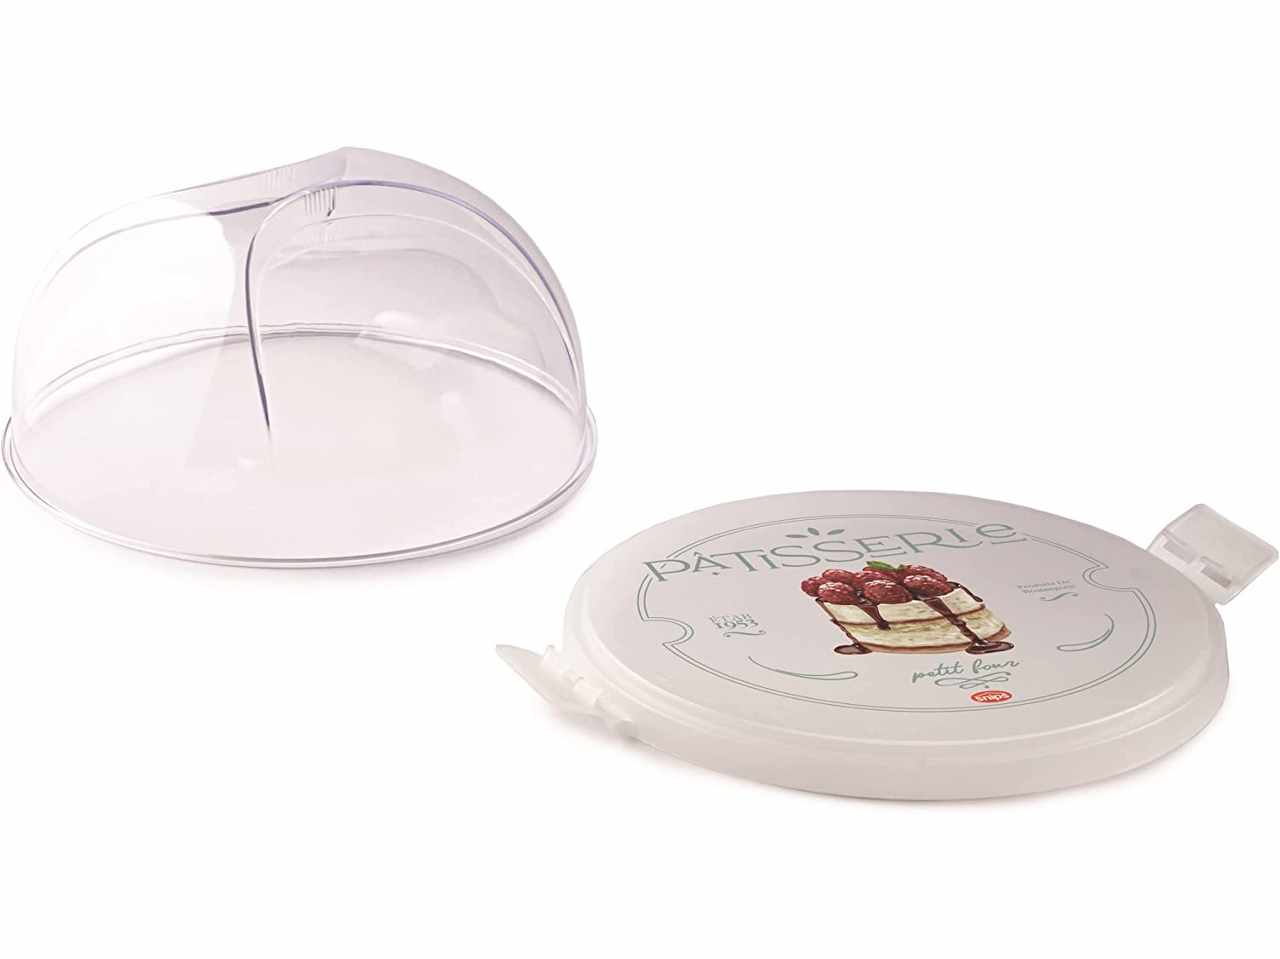 Trasparente Snips Made in Italy Pastries Keepeer con 2 chiusure di sicurezza 0% BPA e phthalate free Porta Dolci Passerie 27 x 26 x 14 cm 